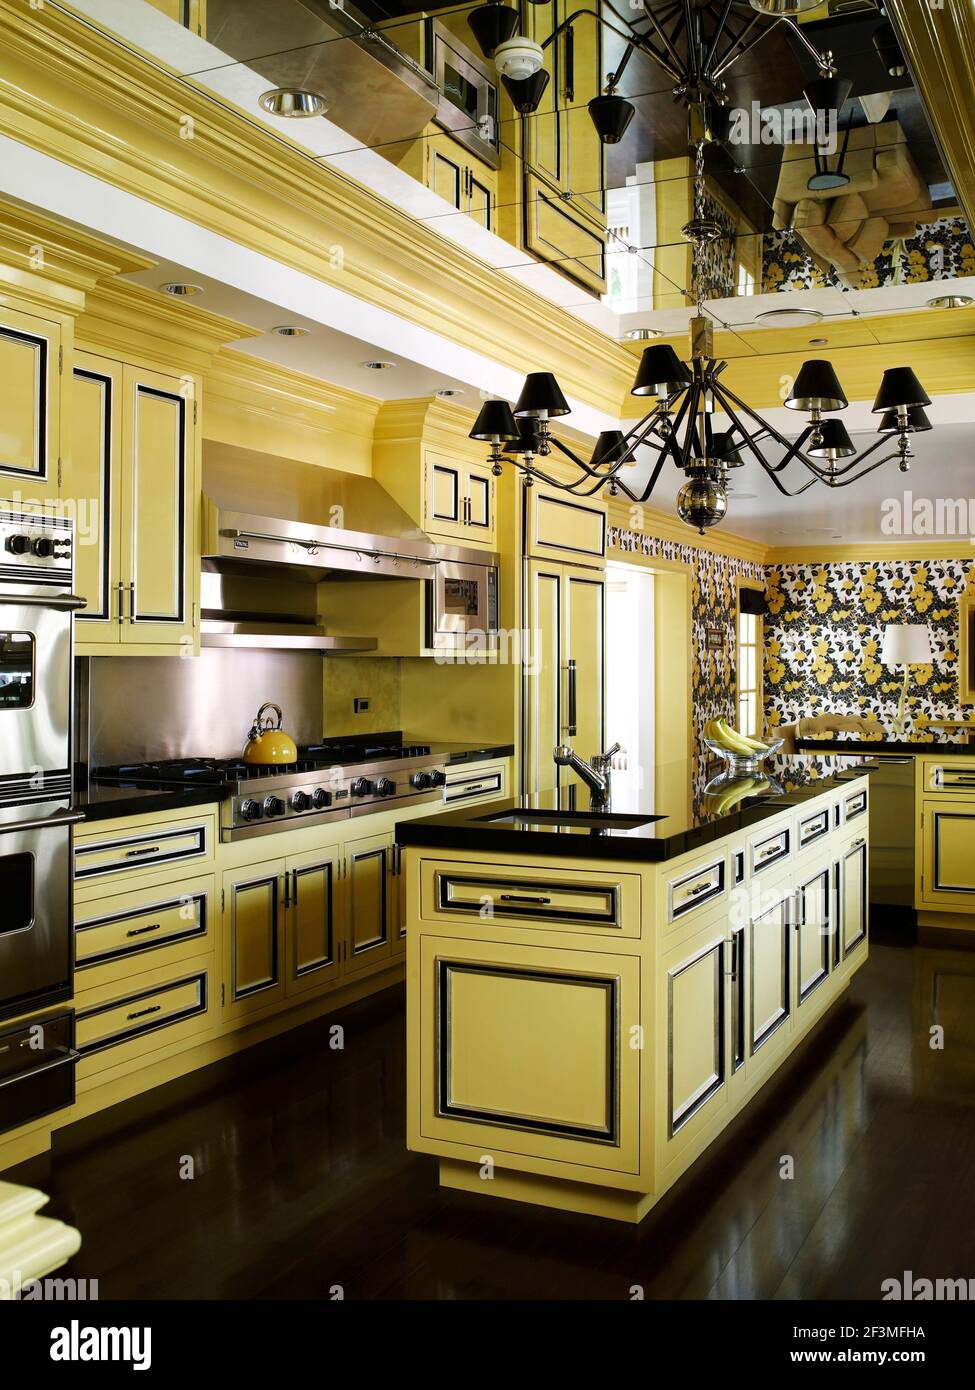 Chandelier hanging from mirrored ceiling above island unit in yellow and black kitchen in residential home, California, USA Stock Photo